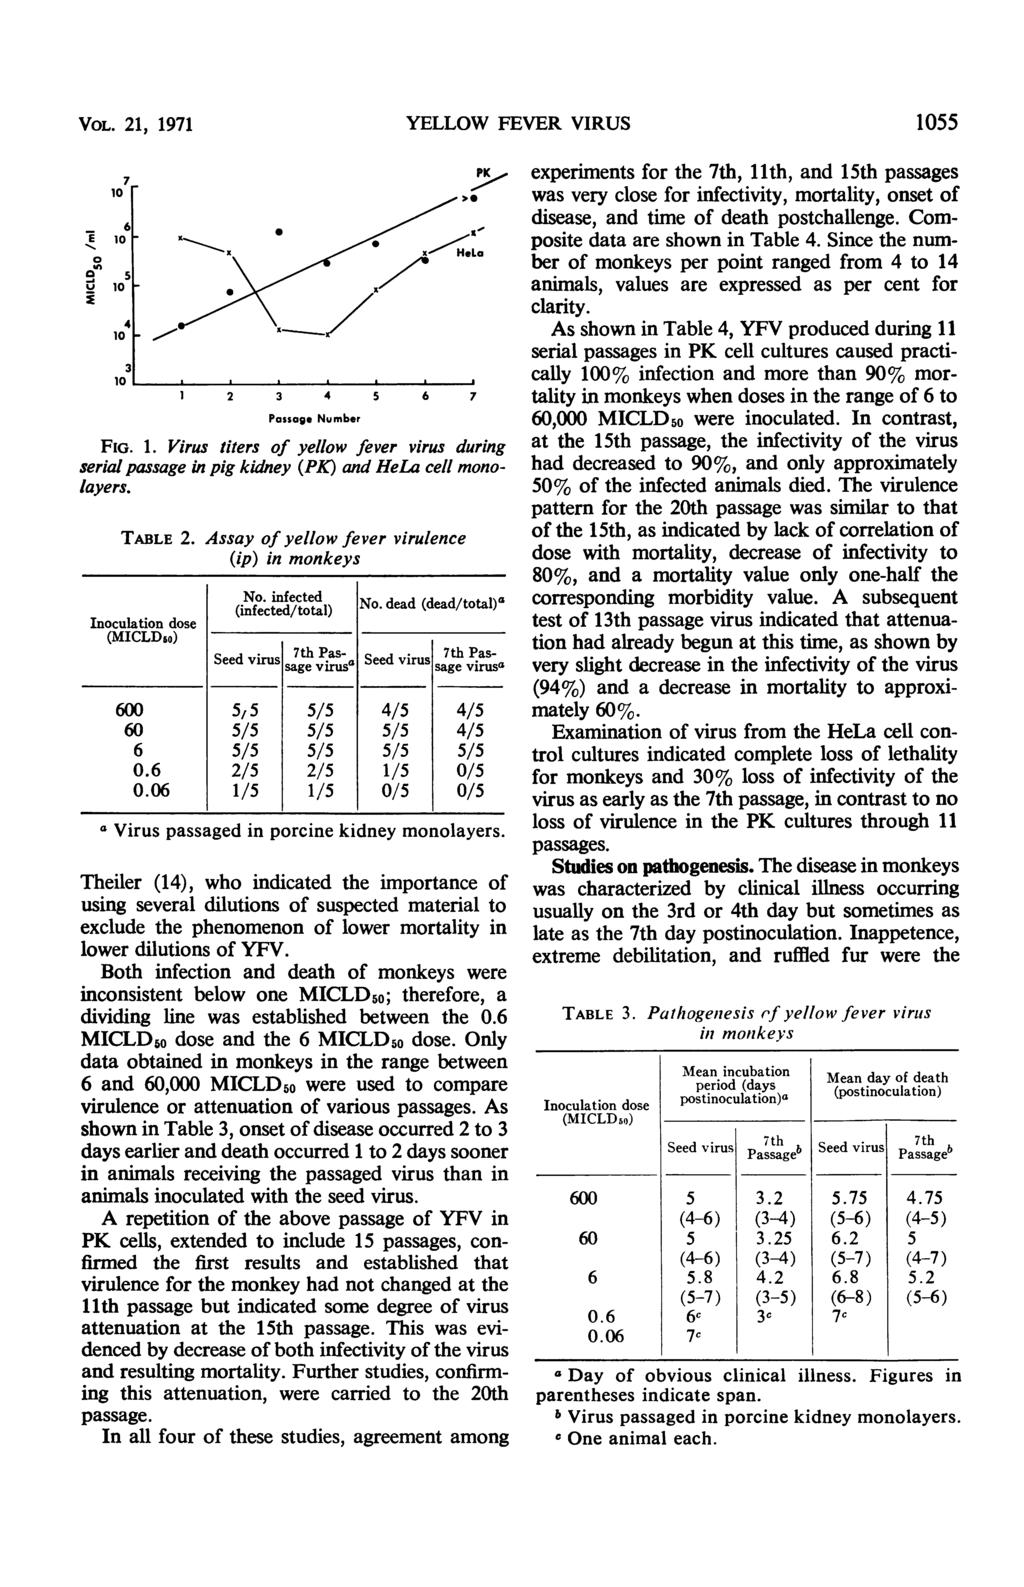 VOL. 21, 1971 YELLOW FEVER VIRUS 1055 7.- 10 6 E 10- tn 5 Li 10 104I 10 0 1 2 3 4 5 6 7 Passage Number FIG. 1. Virus titers of yellow fever virus during serial passage in pig kidney (PK) and HeLa cell monolayers.